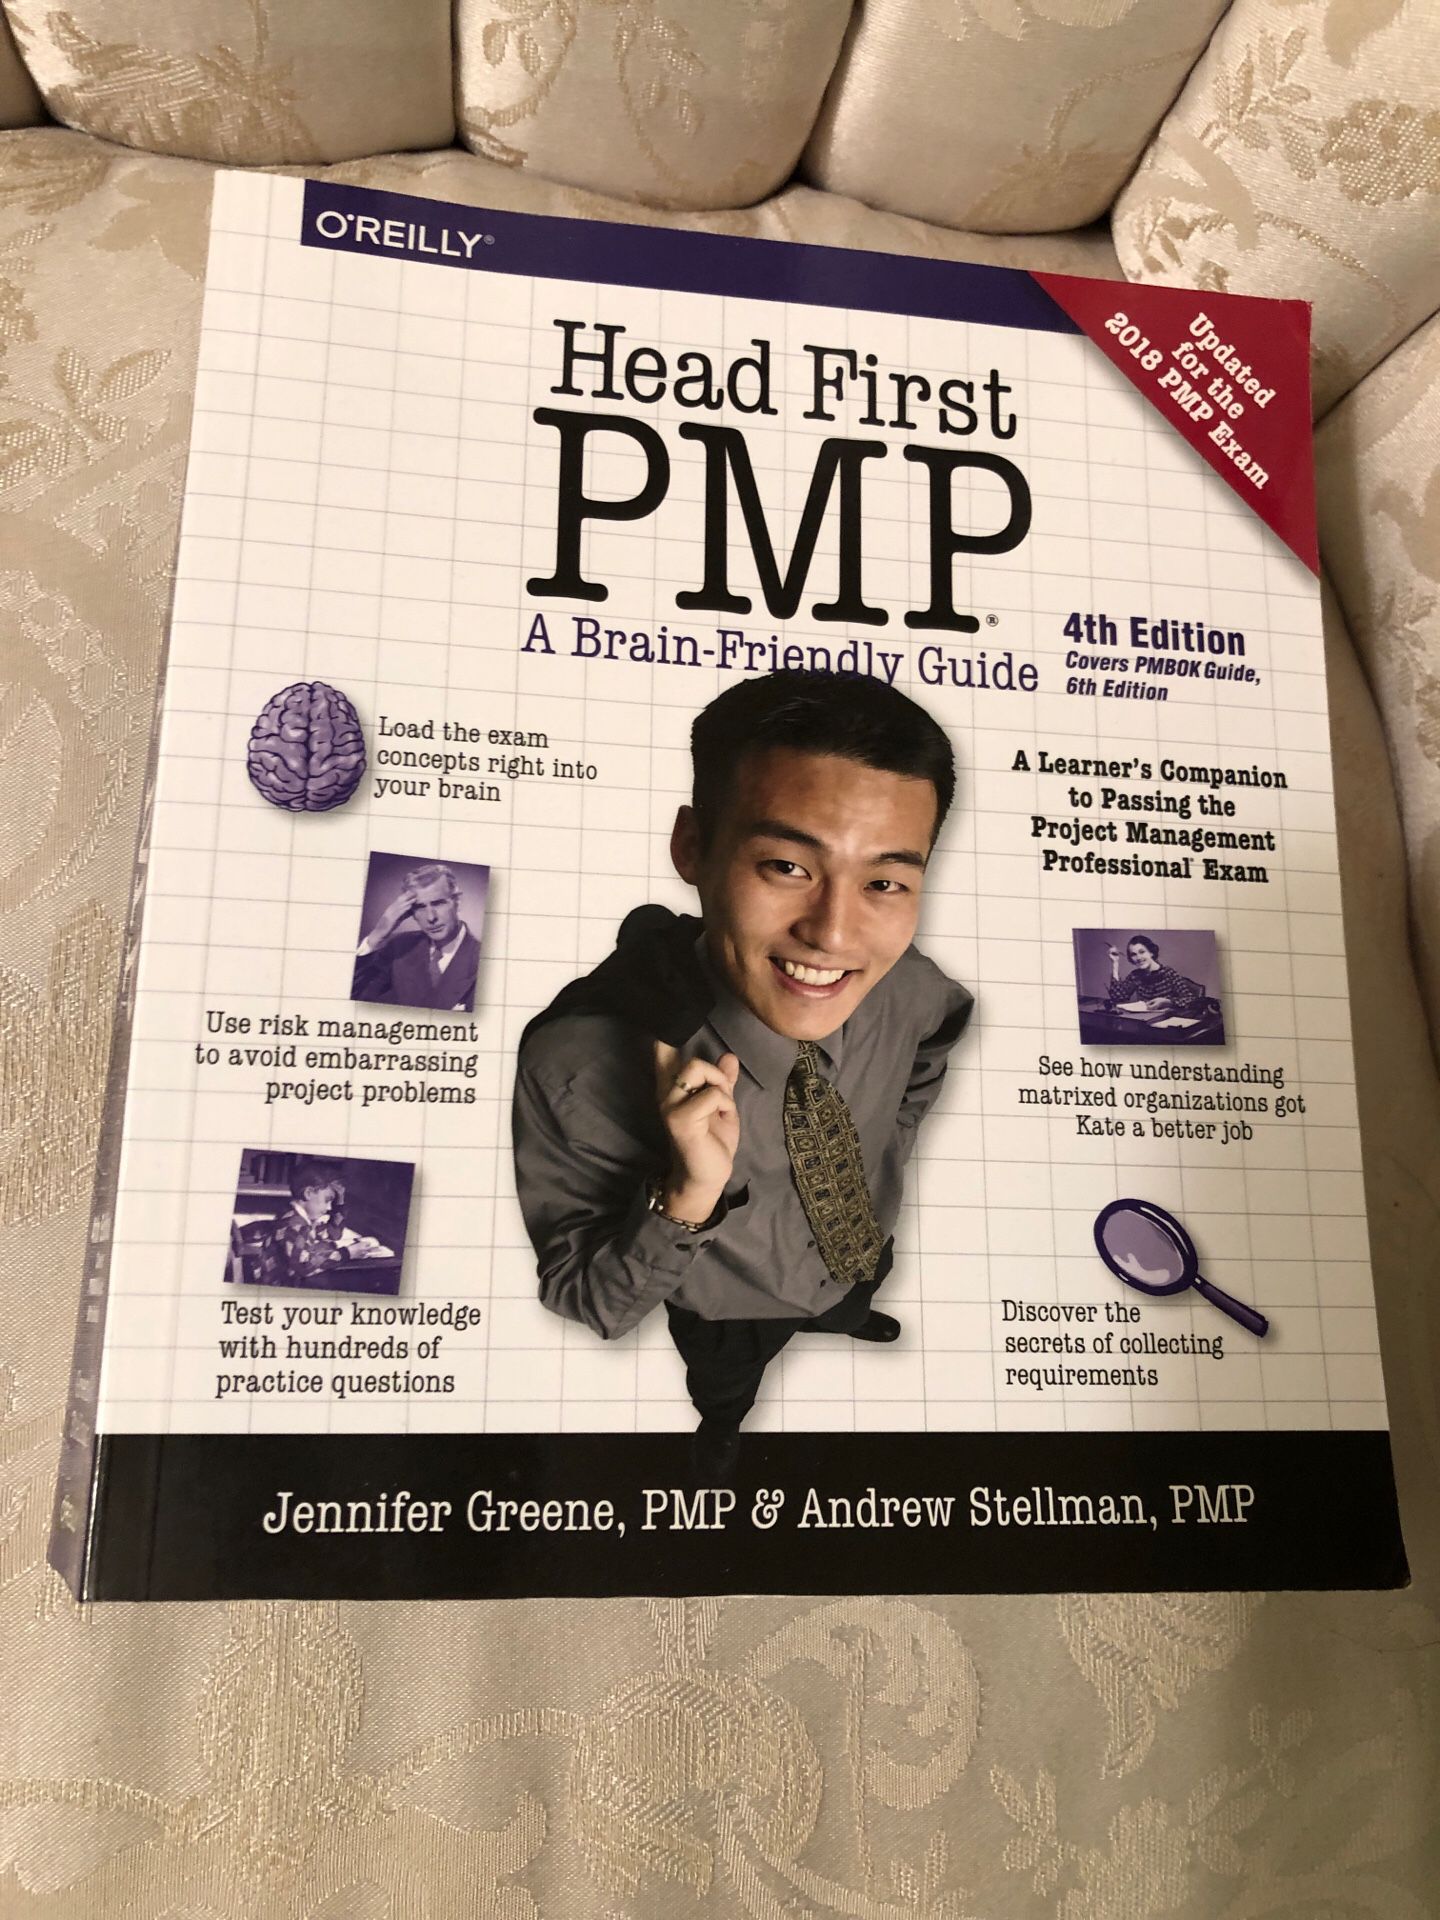 Head First PMP: 4th edition covers PMBOK Guide, 6th edition